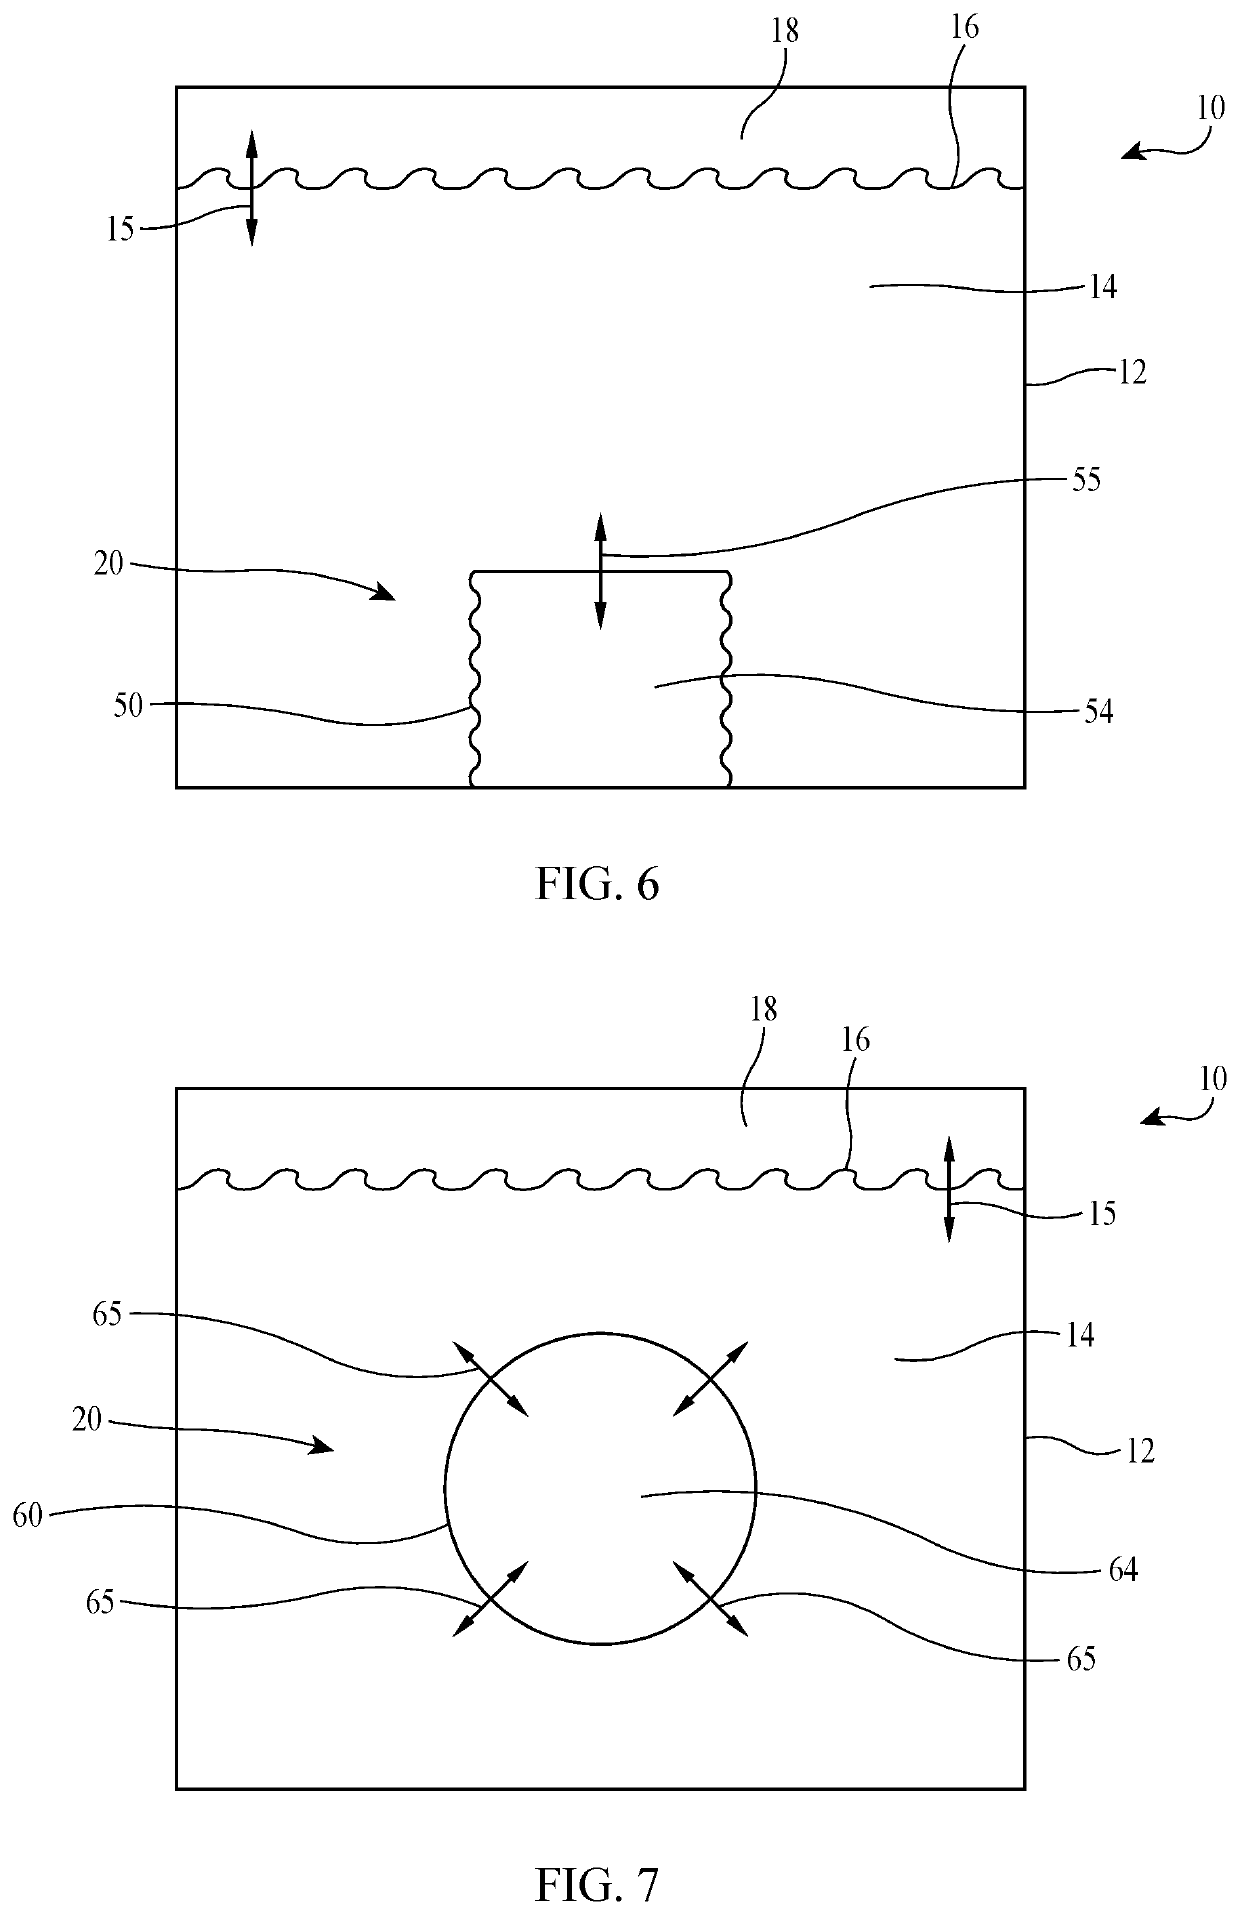 Motion absorbing system and method for a structure